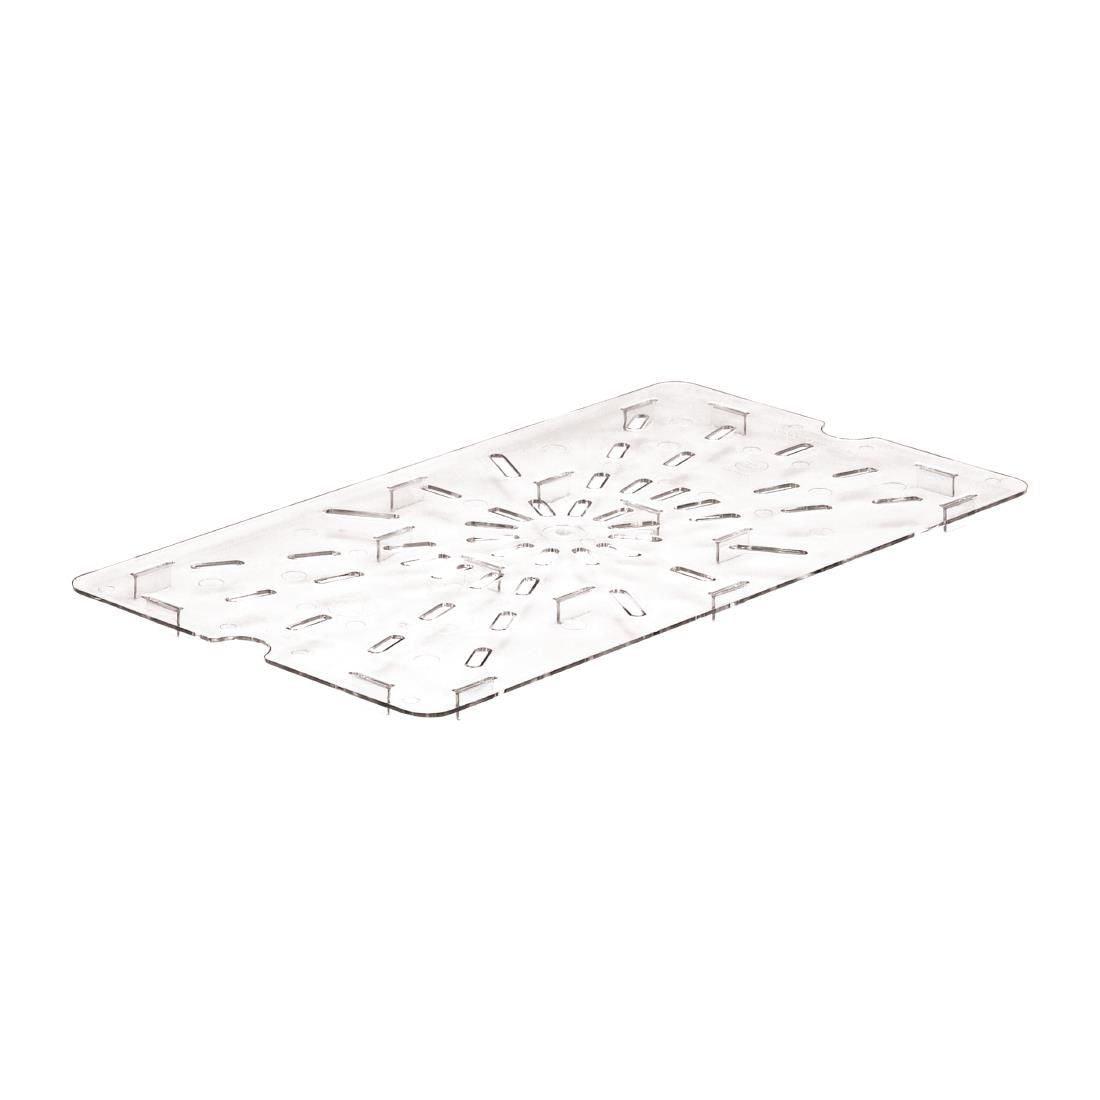 DM741 Cambro Polycarbonate 1/1 Gastronorm Pan Drain Shelf JD Catering Equipment Solutions Ltd